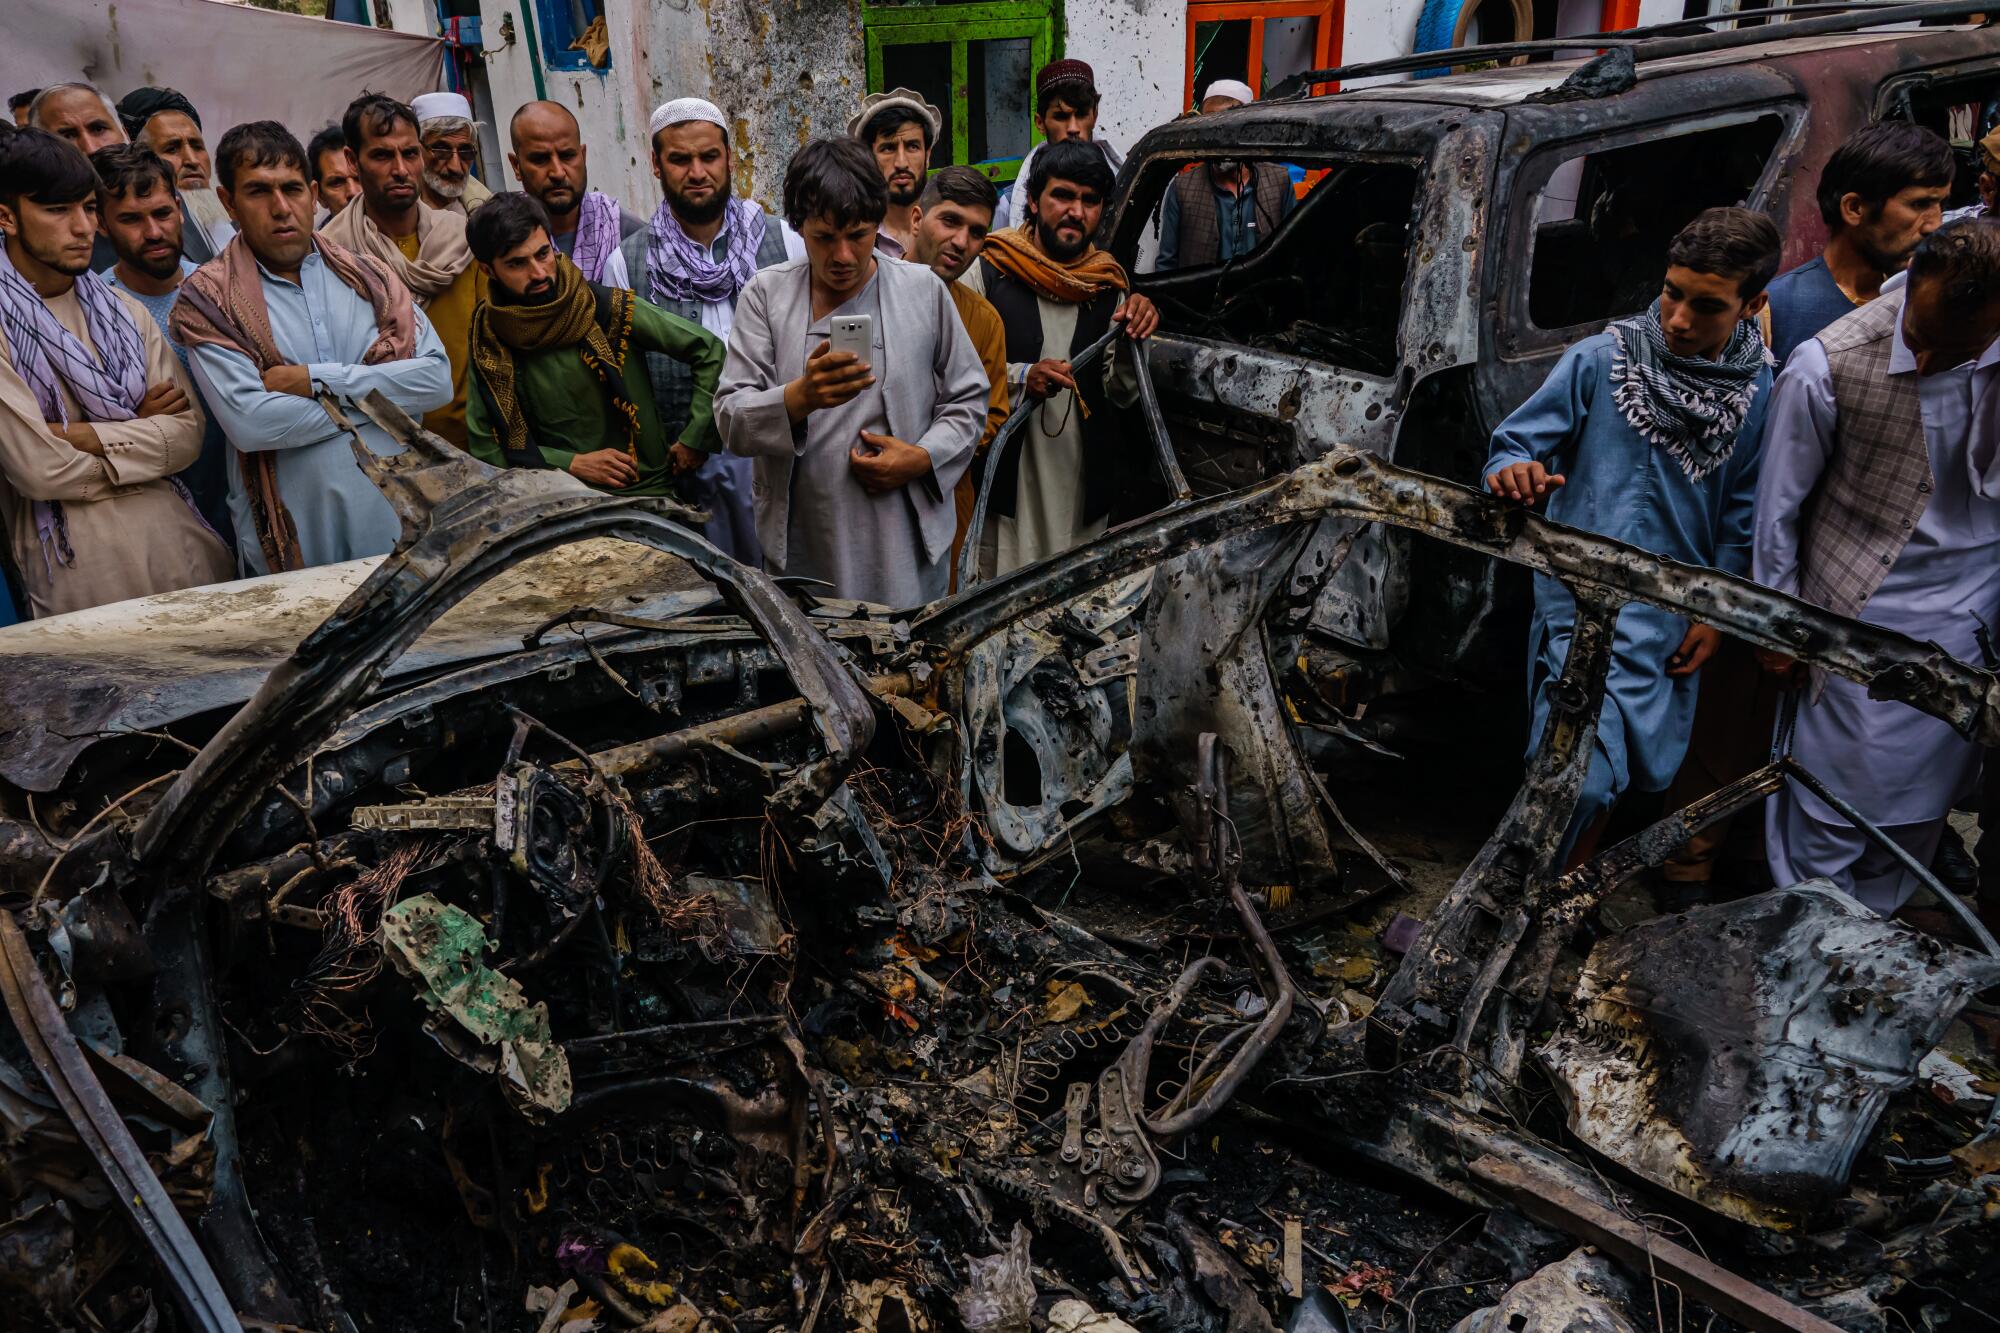 Relatives and neighbors of the Ahmadi family gathered around the incinerated husk of a vehicle.